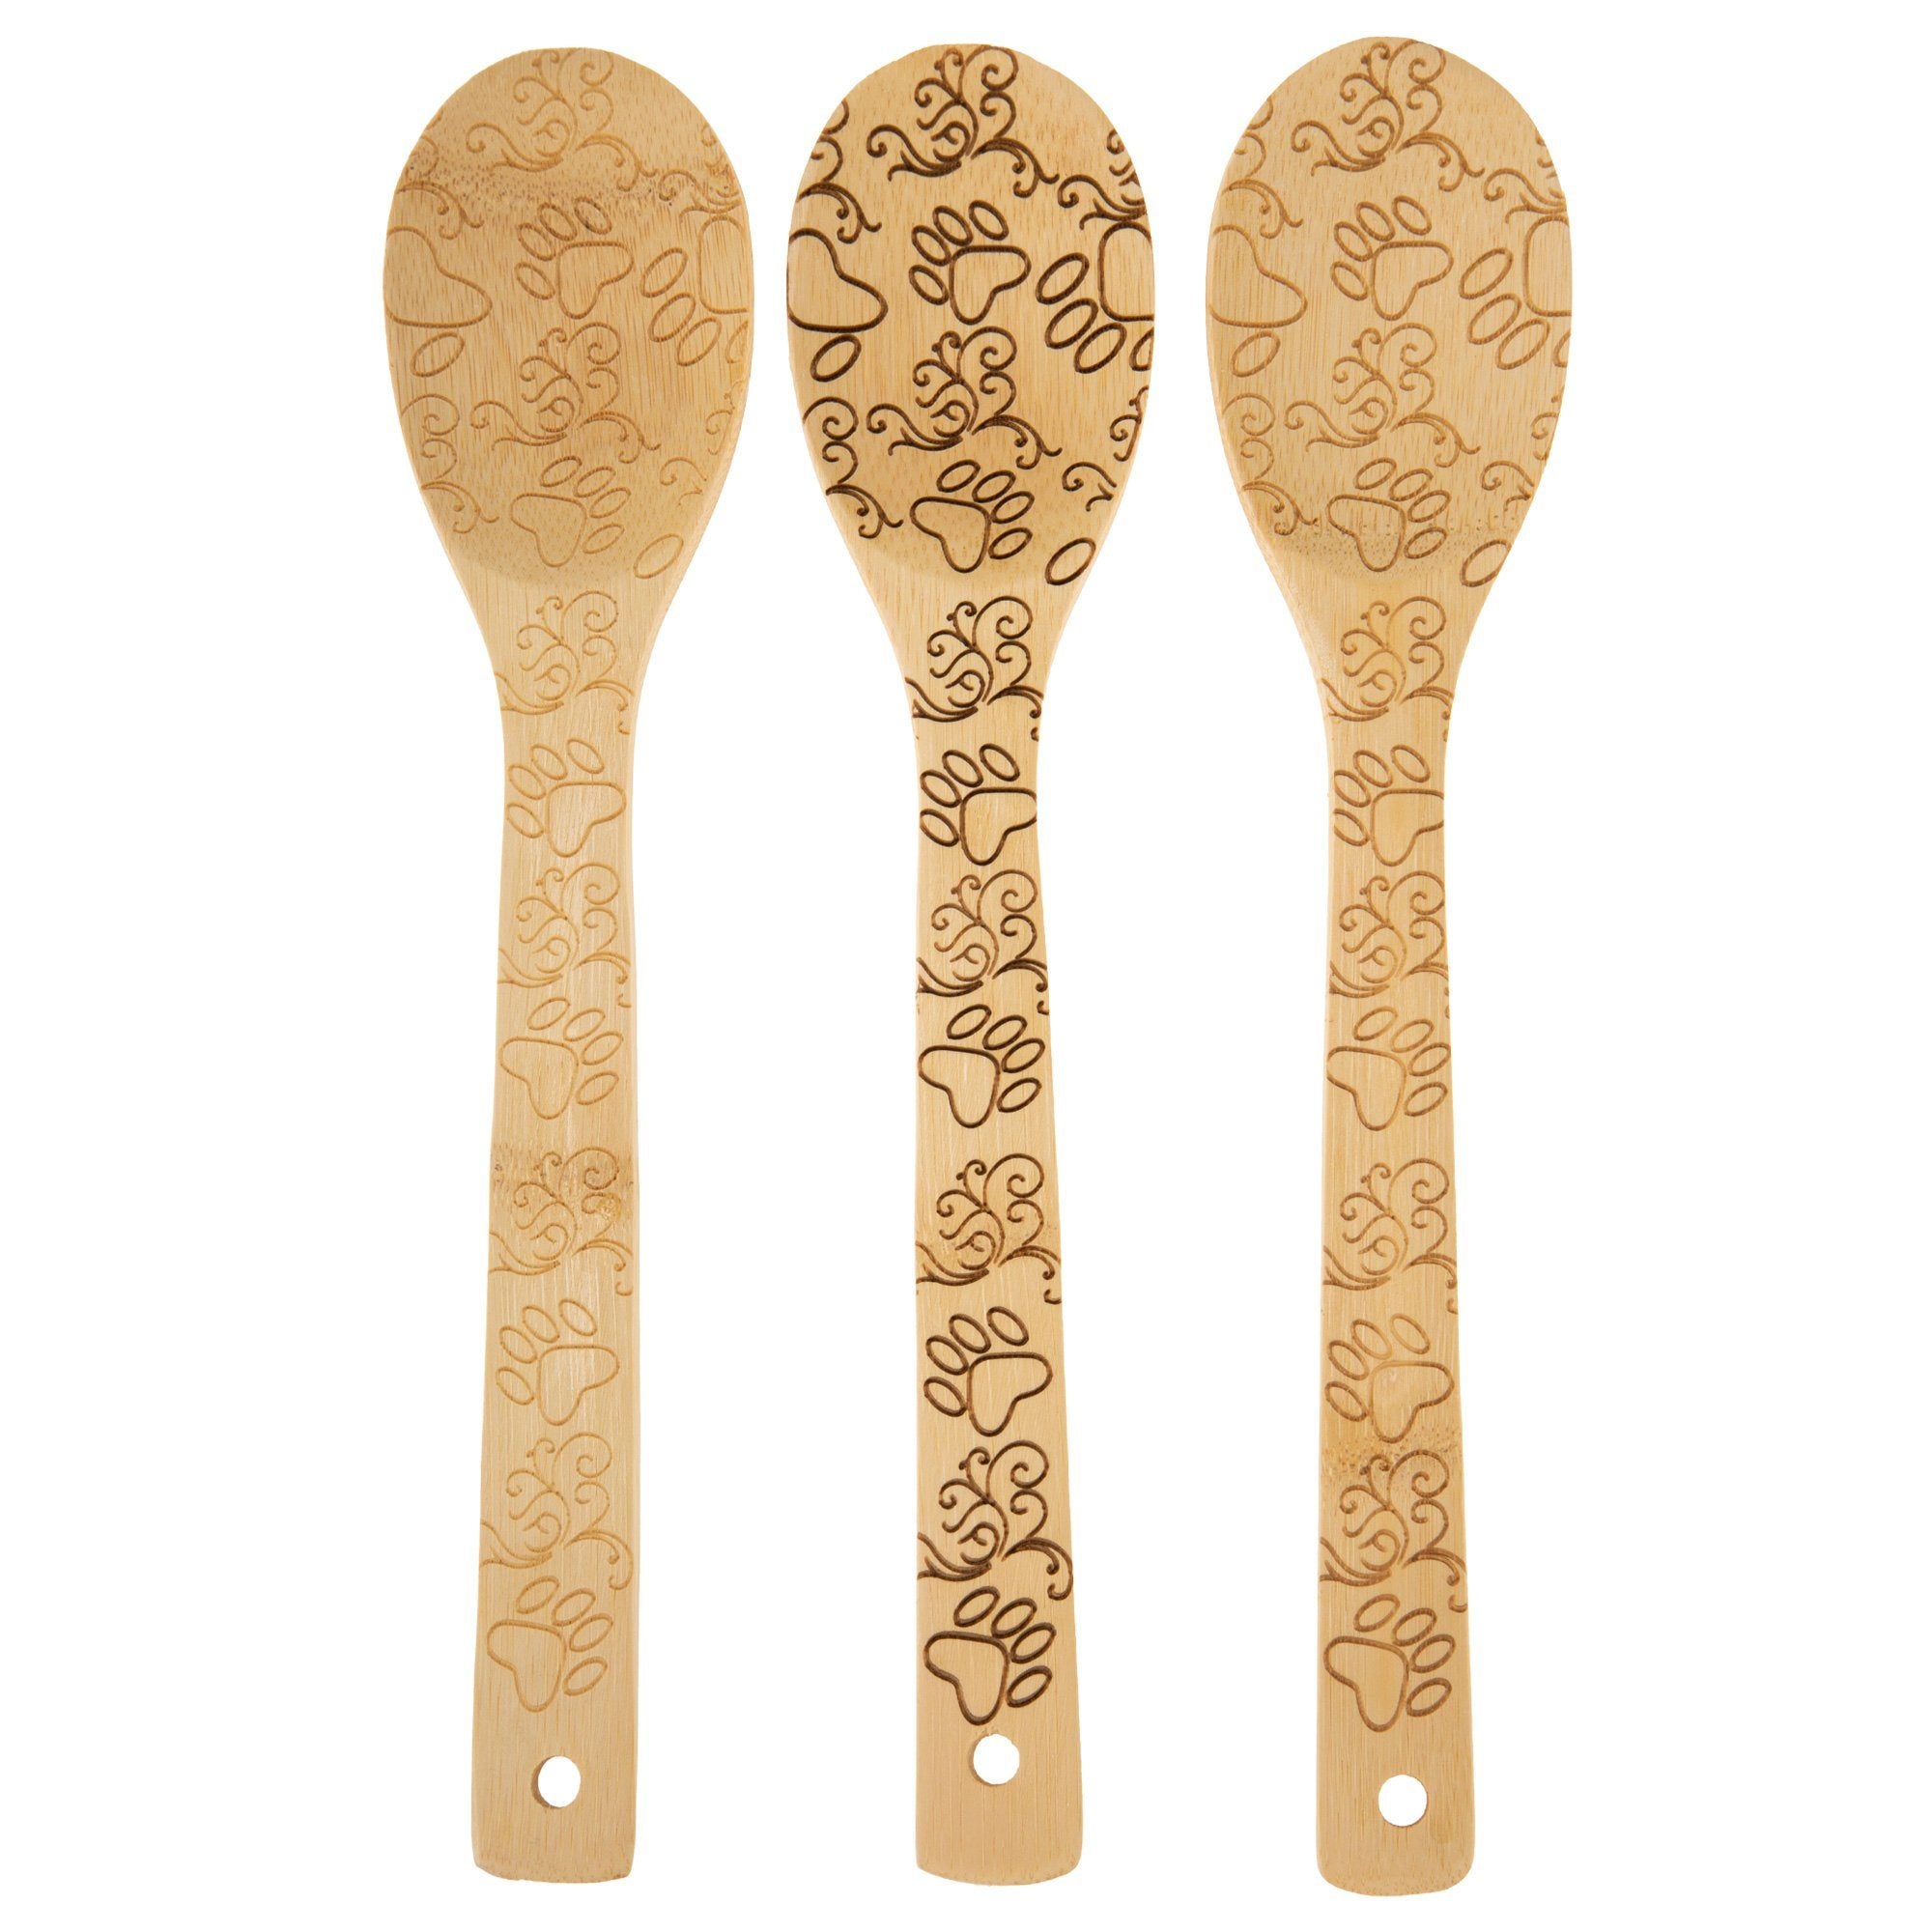 Bamboo Paws Serving Spoon Set